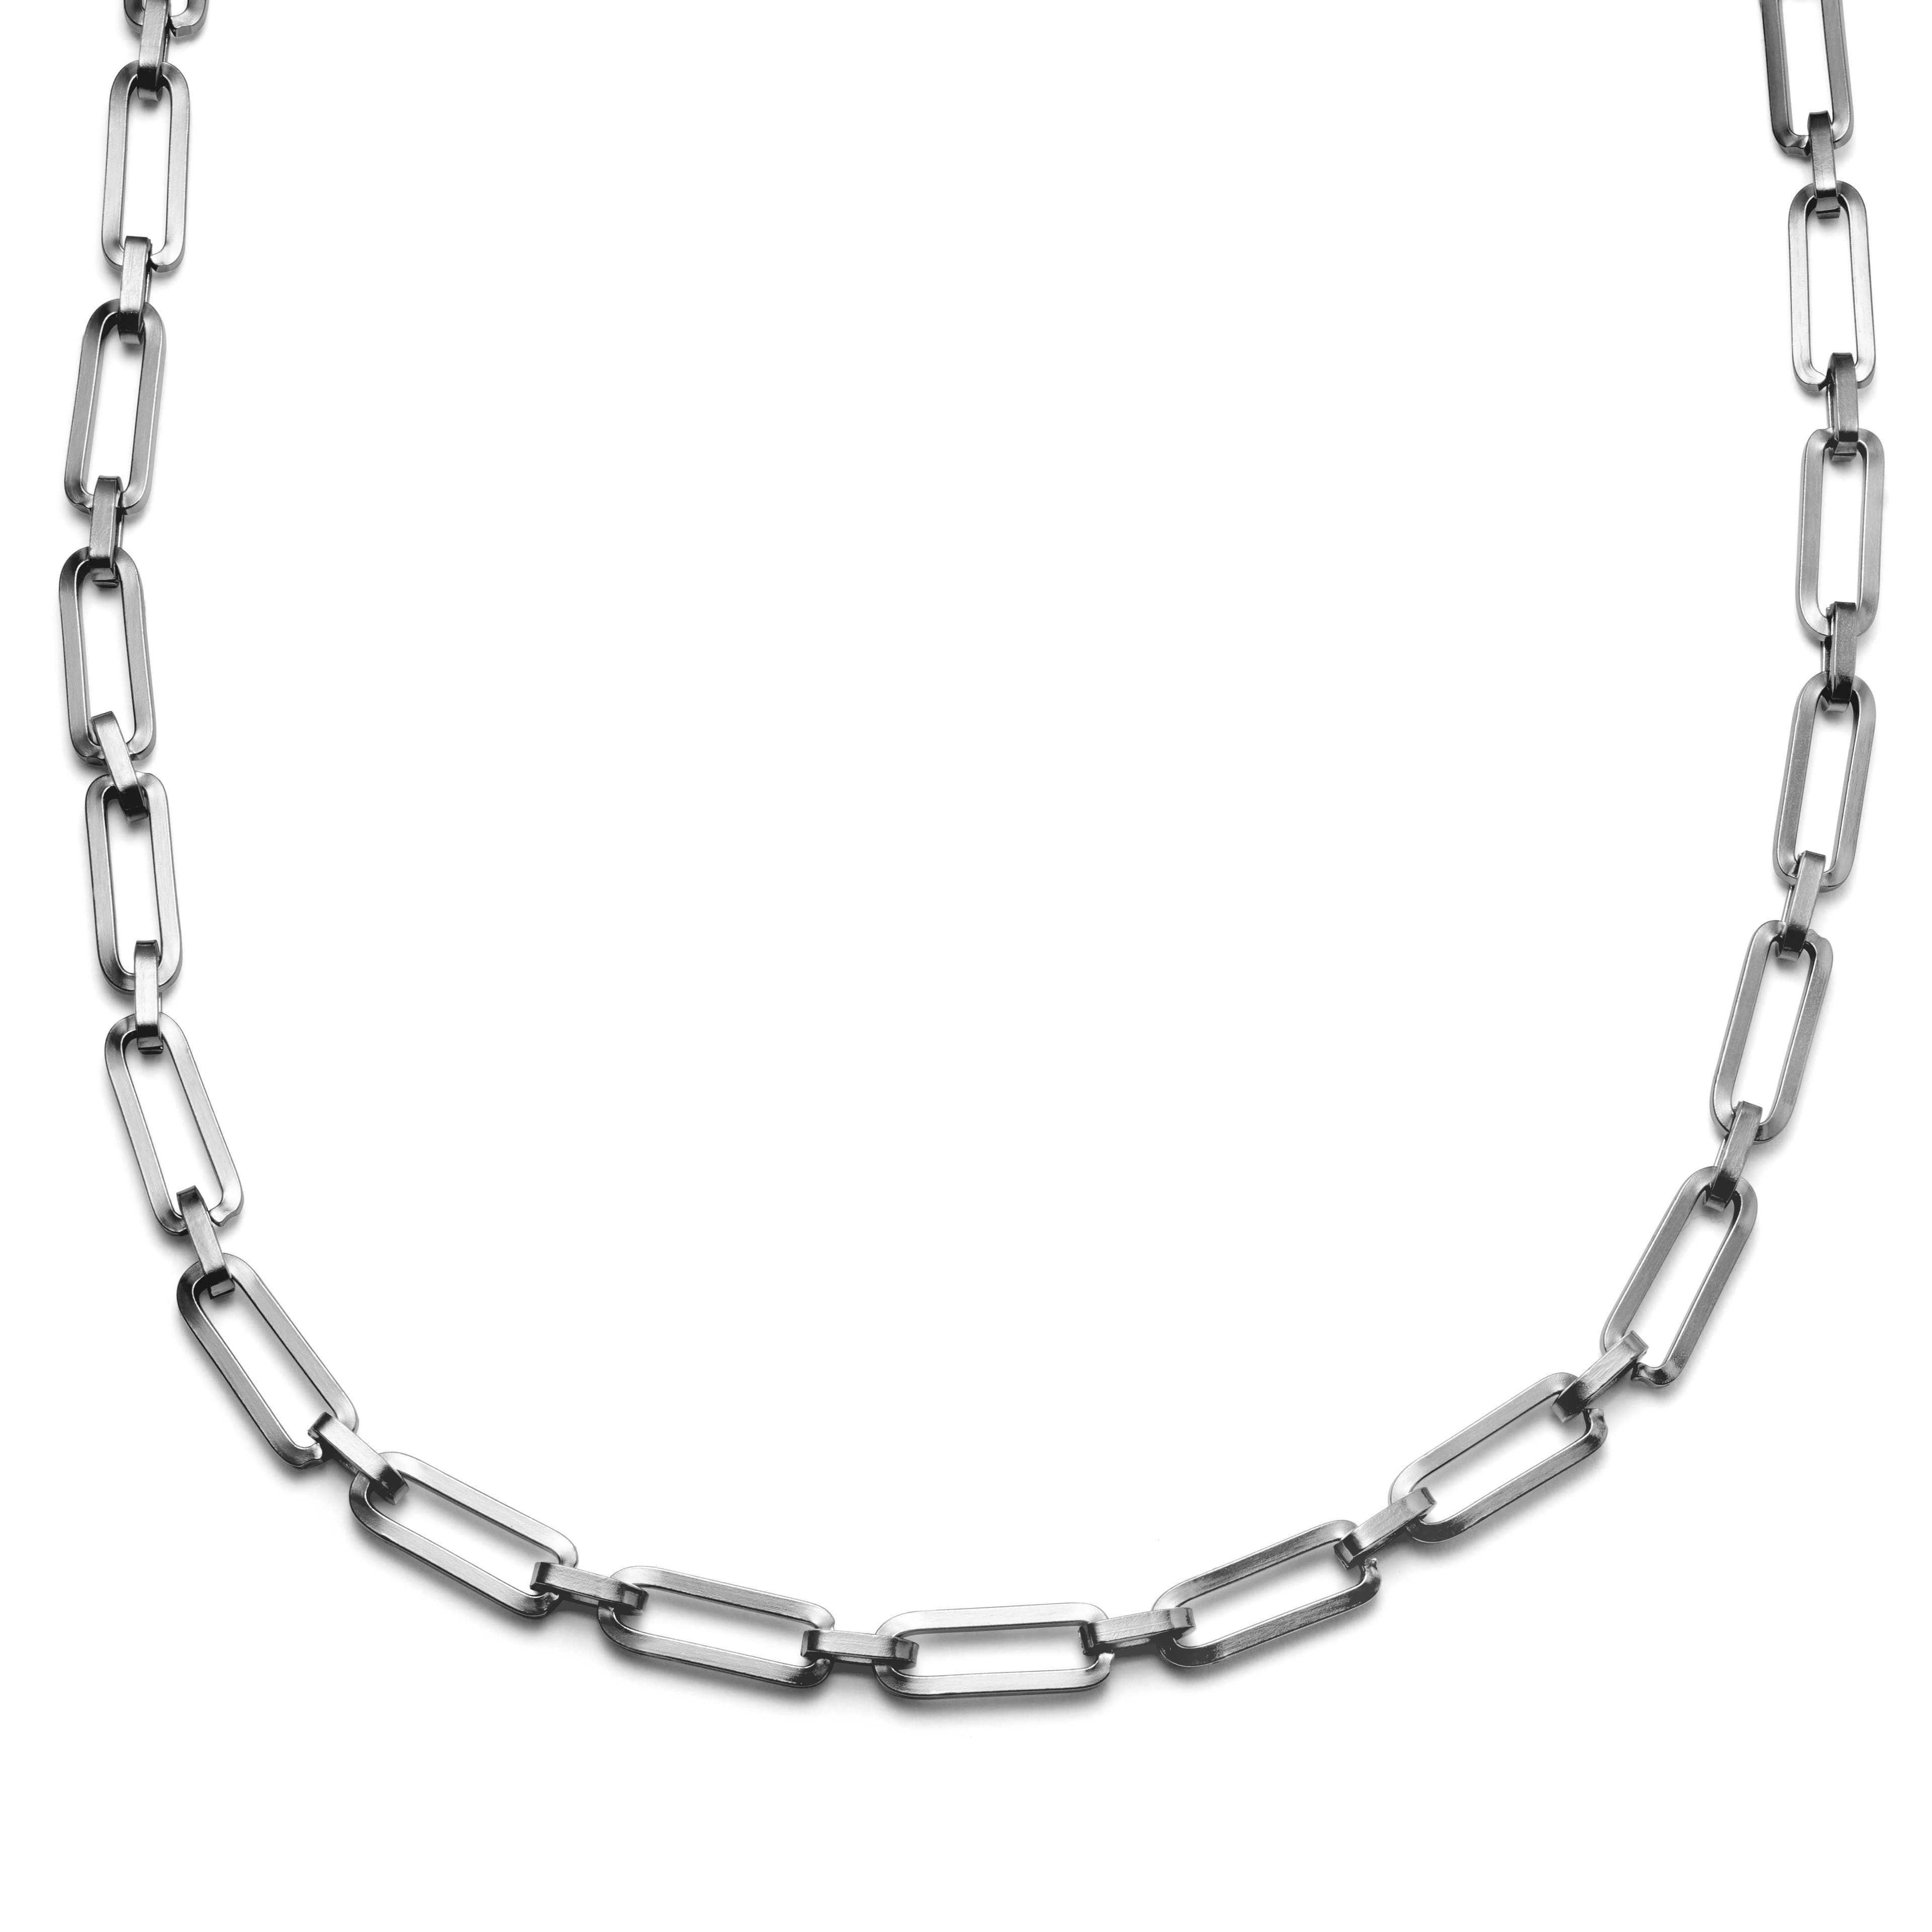 Amager | 8 mm Silver-Tone Stainless Steel Lock Cable Chain Necklace